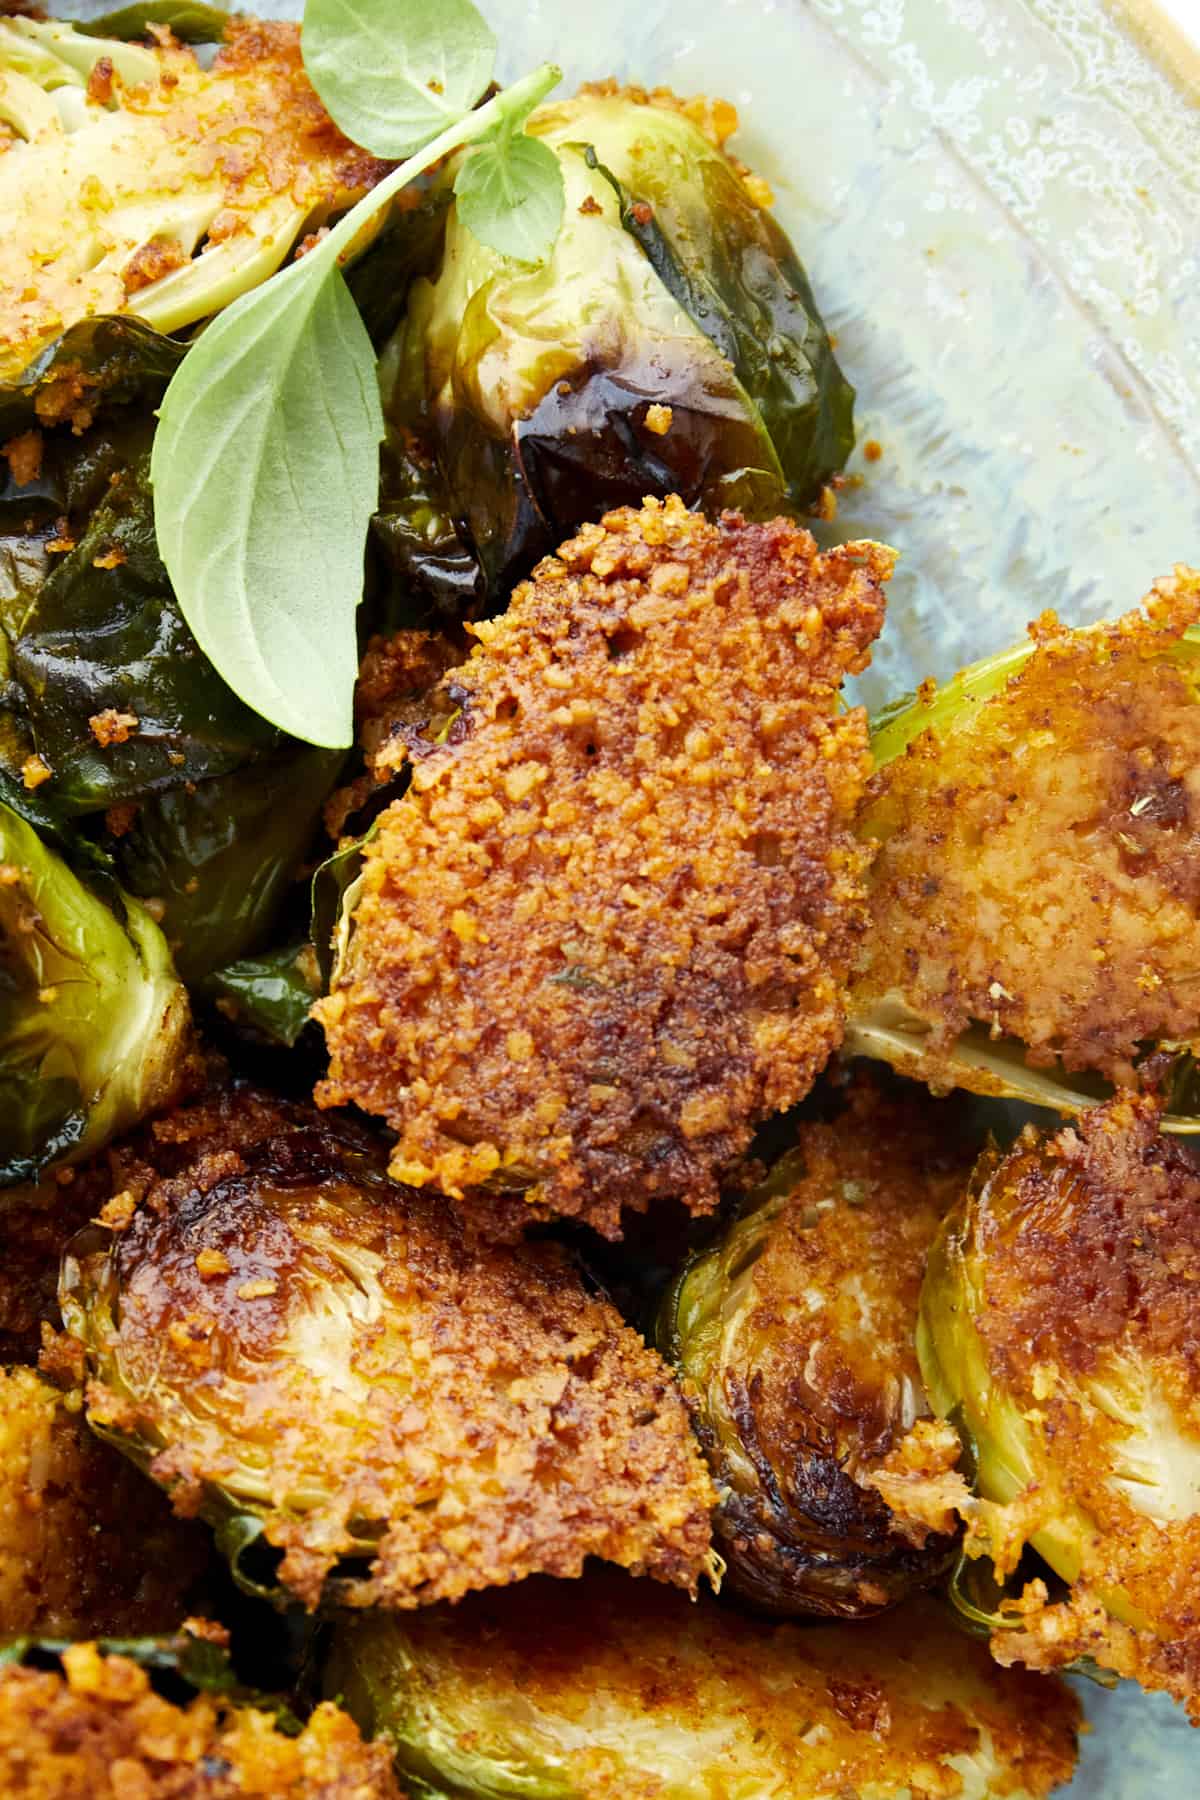 Close up image of Oven Roasted Parmesan Brussel Sprouts.